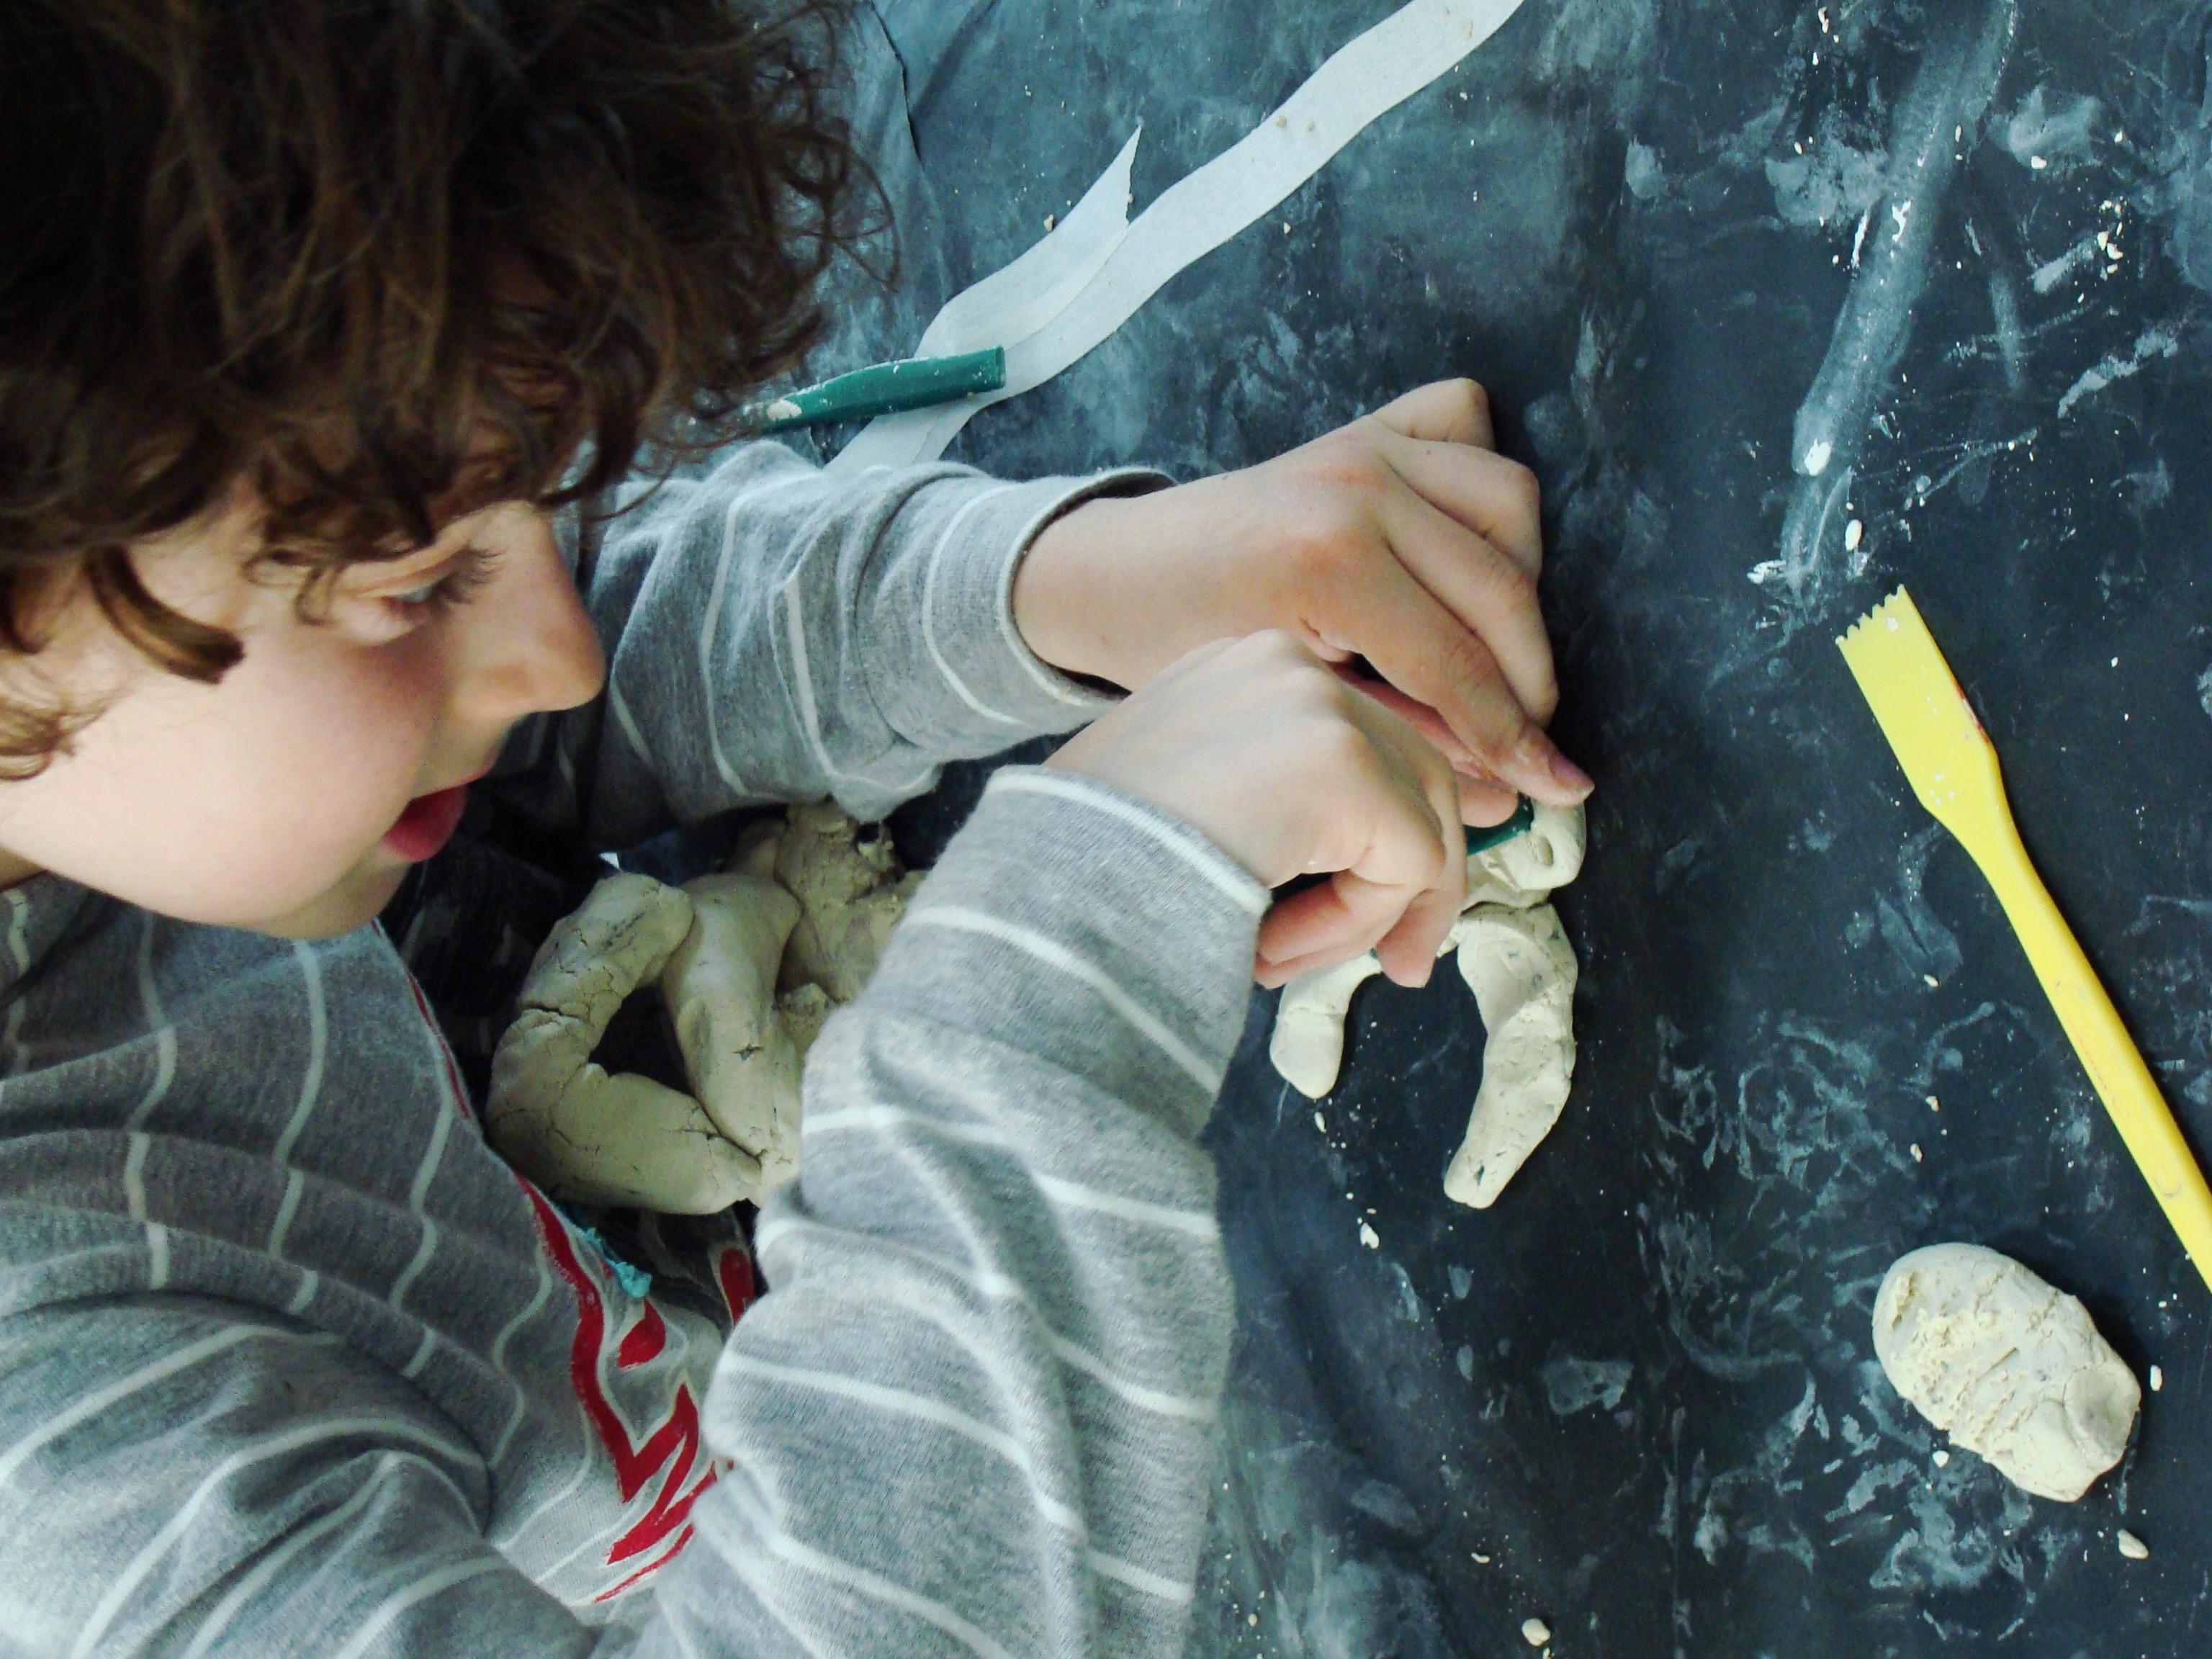 A pale-skinned child with short, dark hair is bent over, creating art with clay and tools.